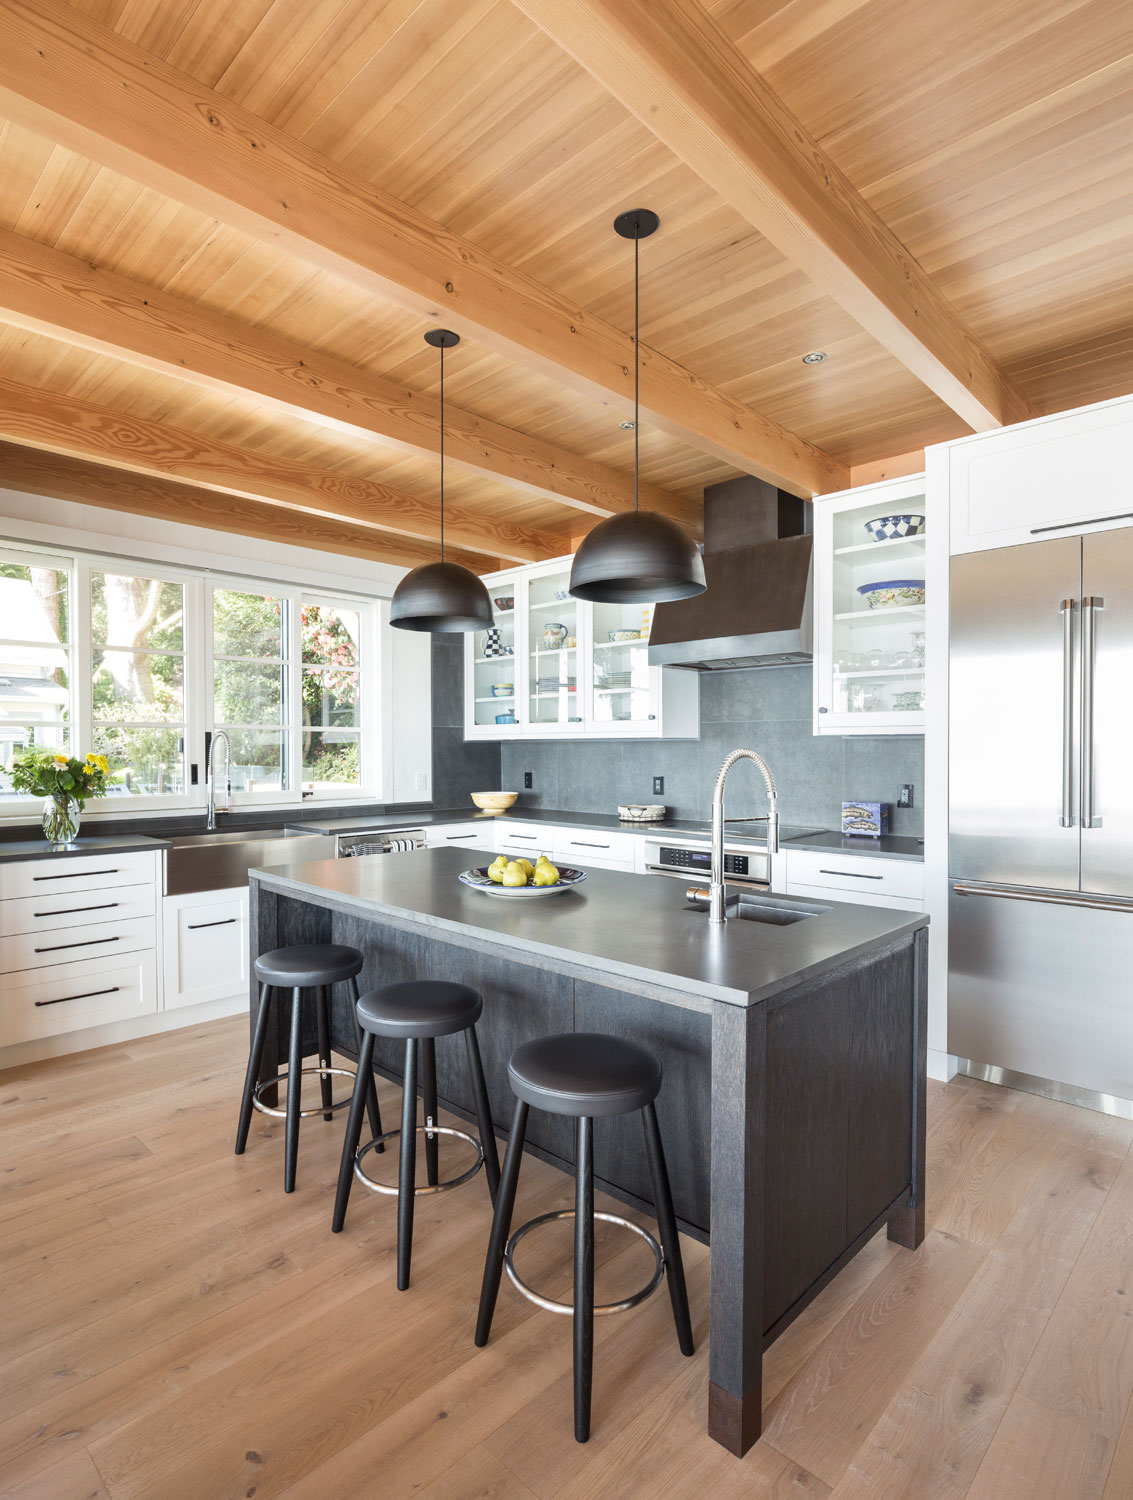 Wooden ceiling with timber beams in a modern kitchen